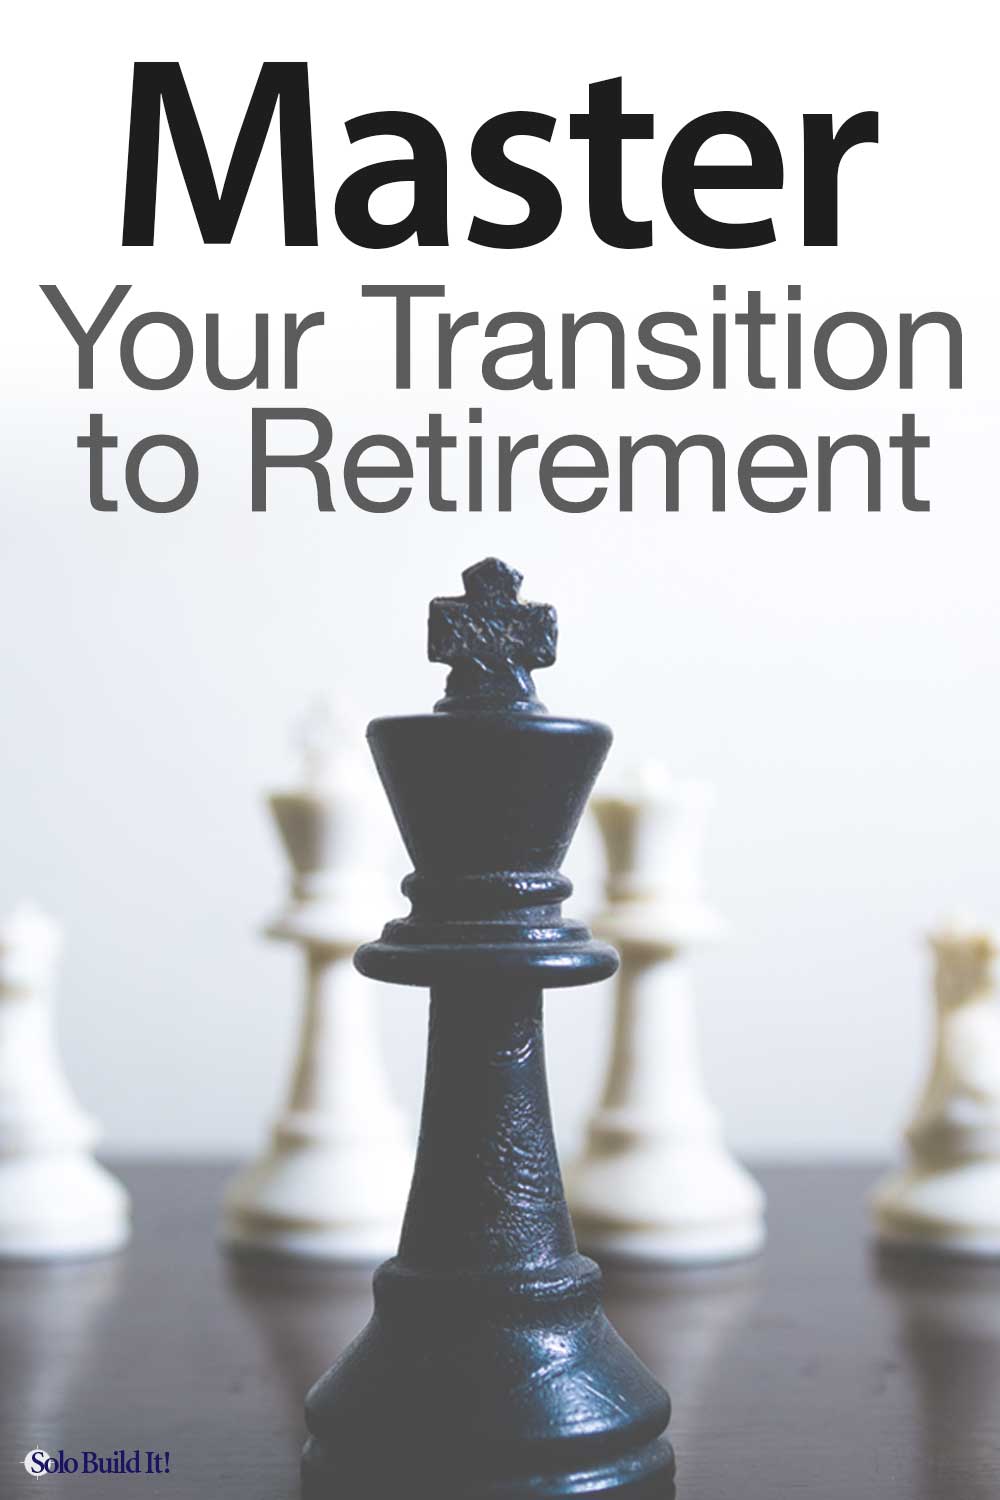 How to Master Your Transition to Retirement